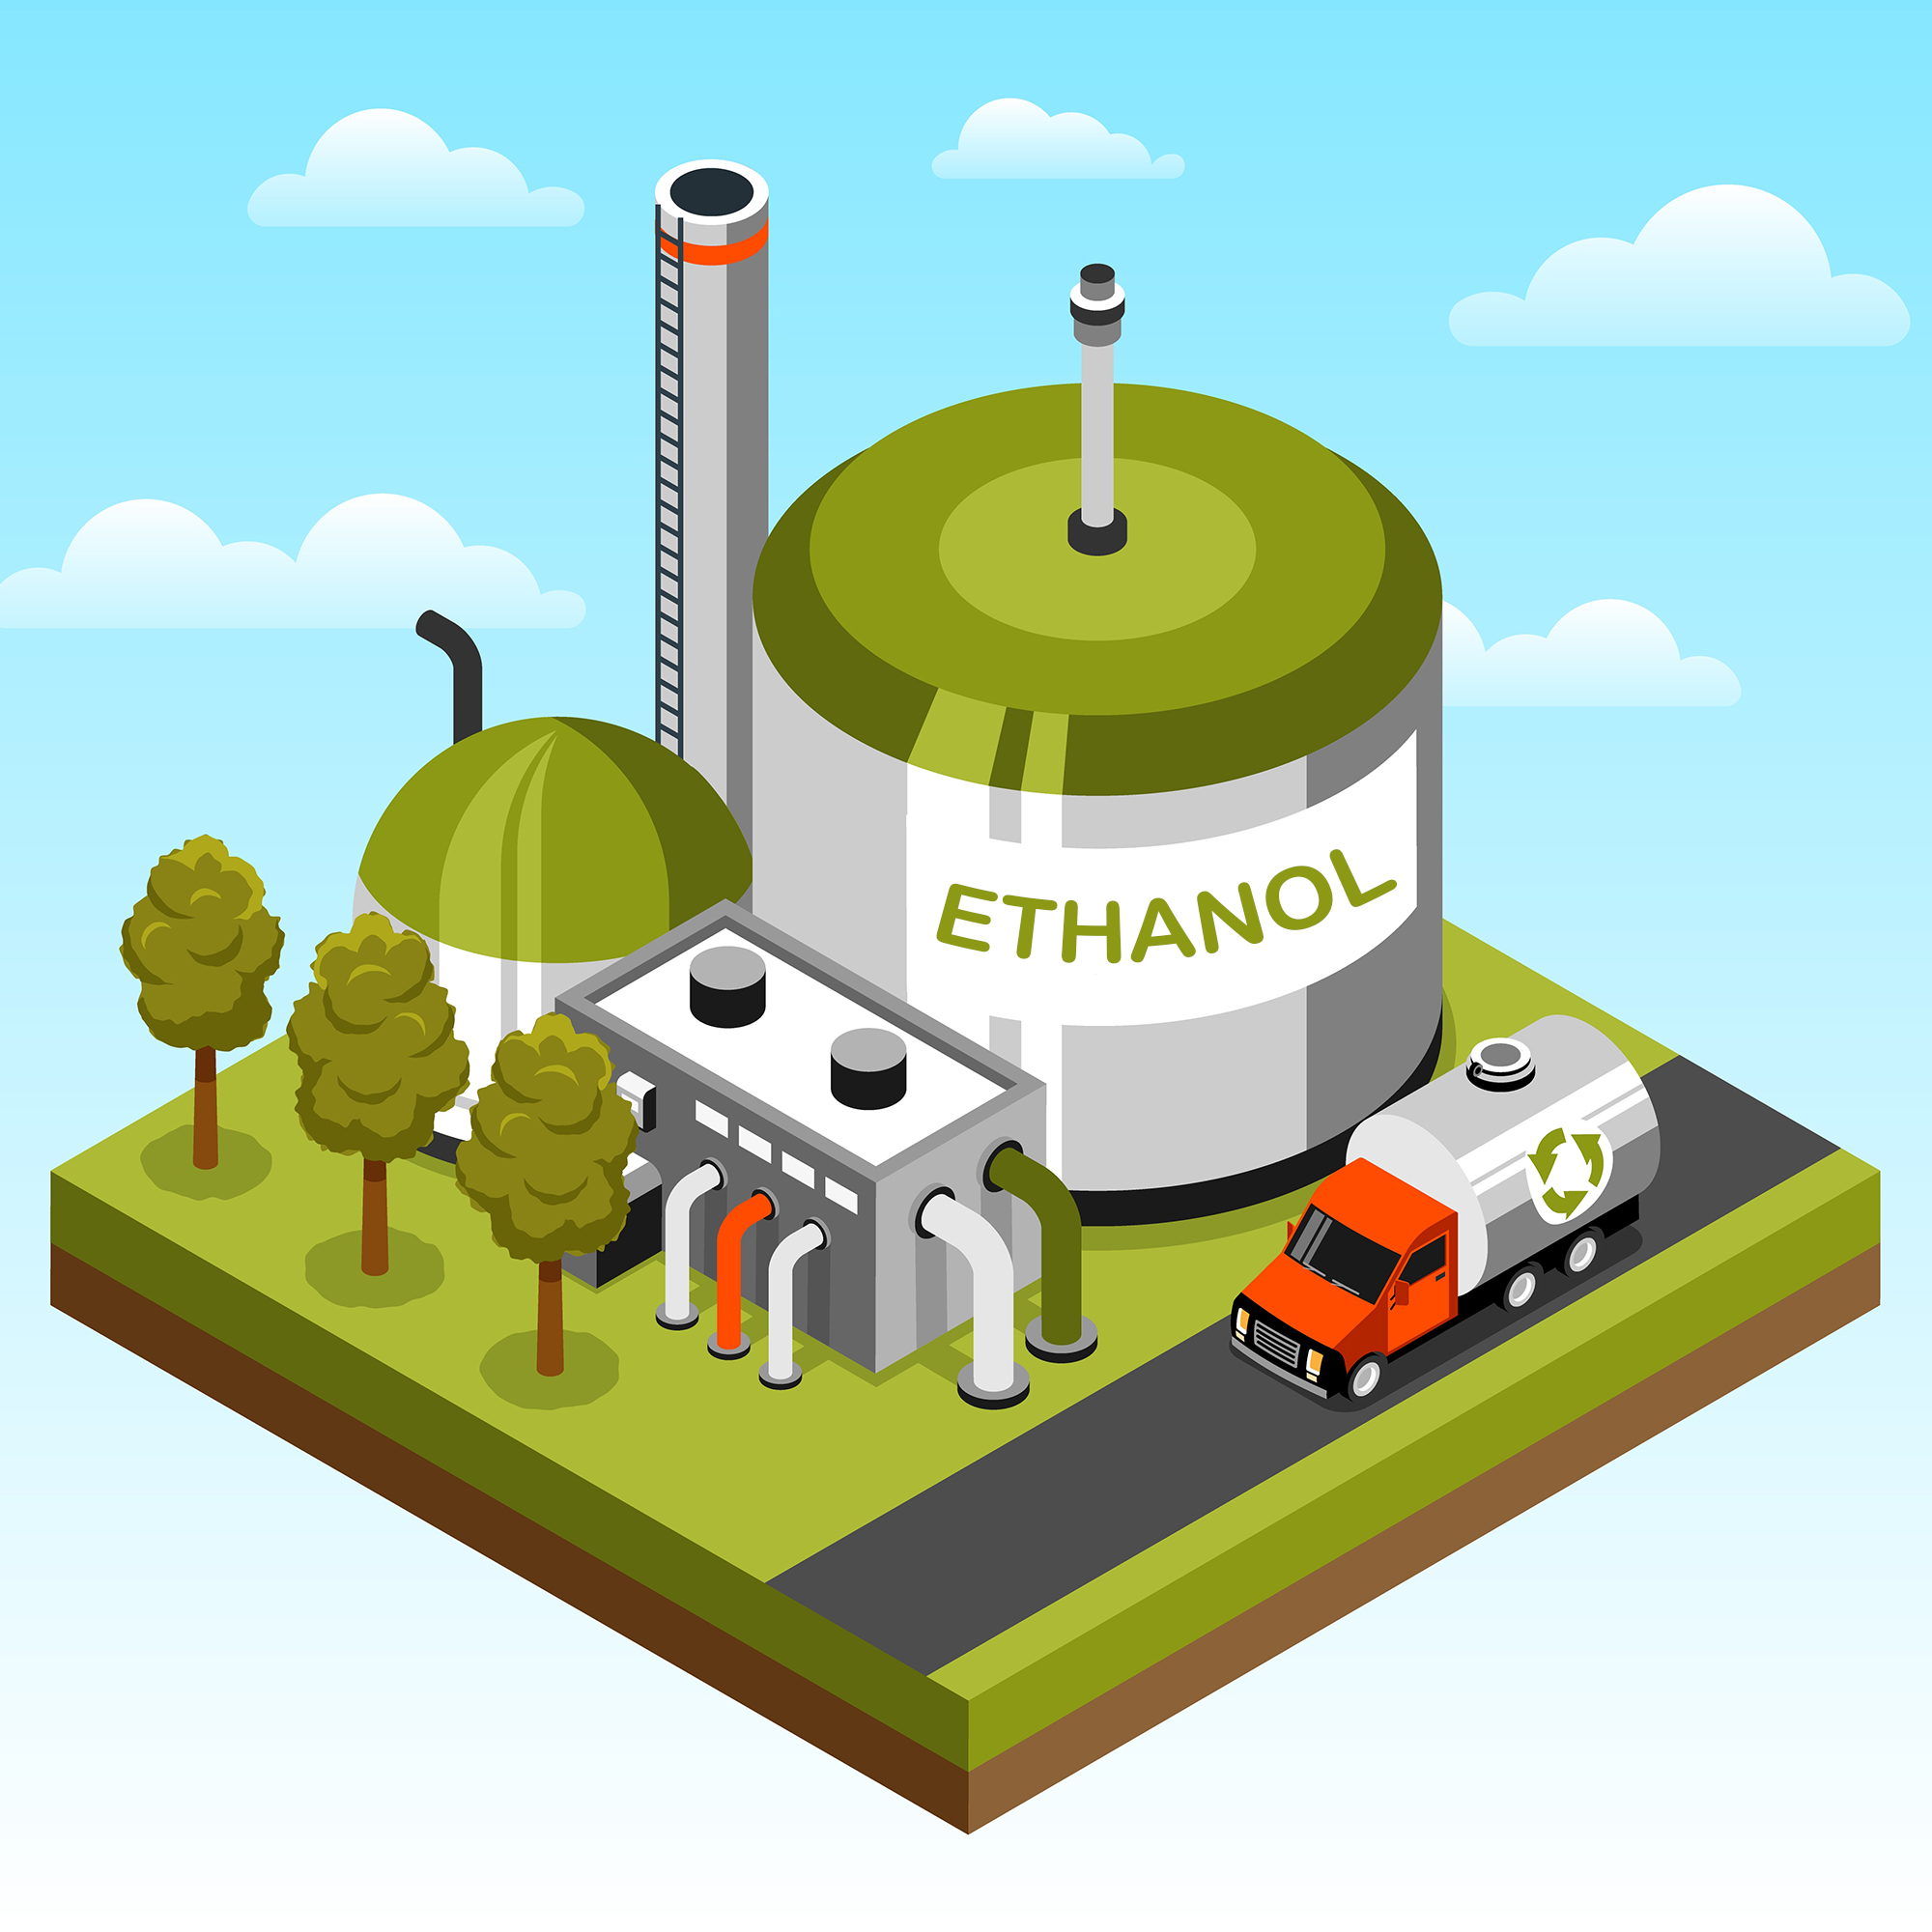 About company ethanol